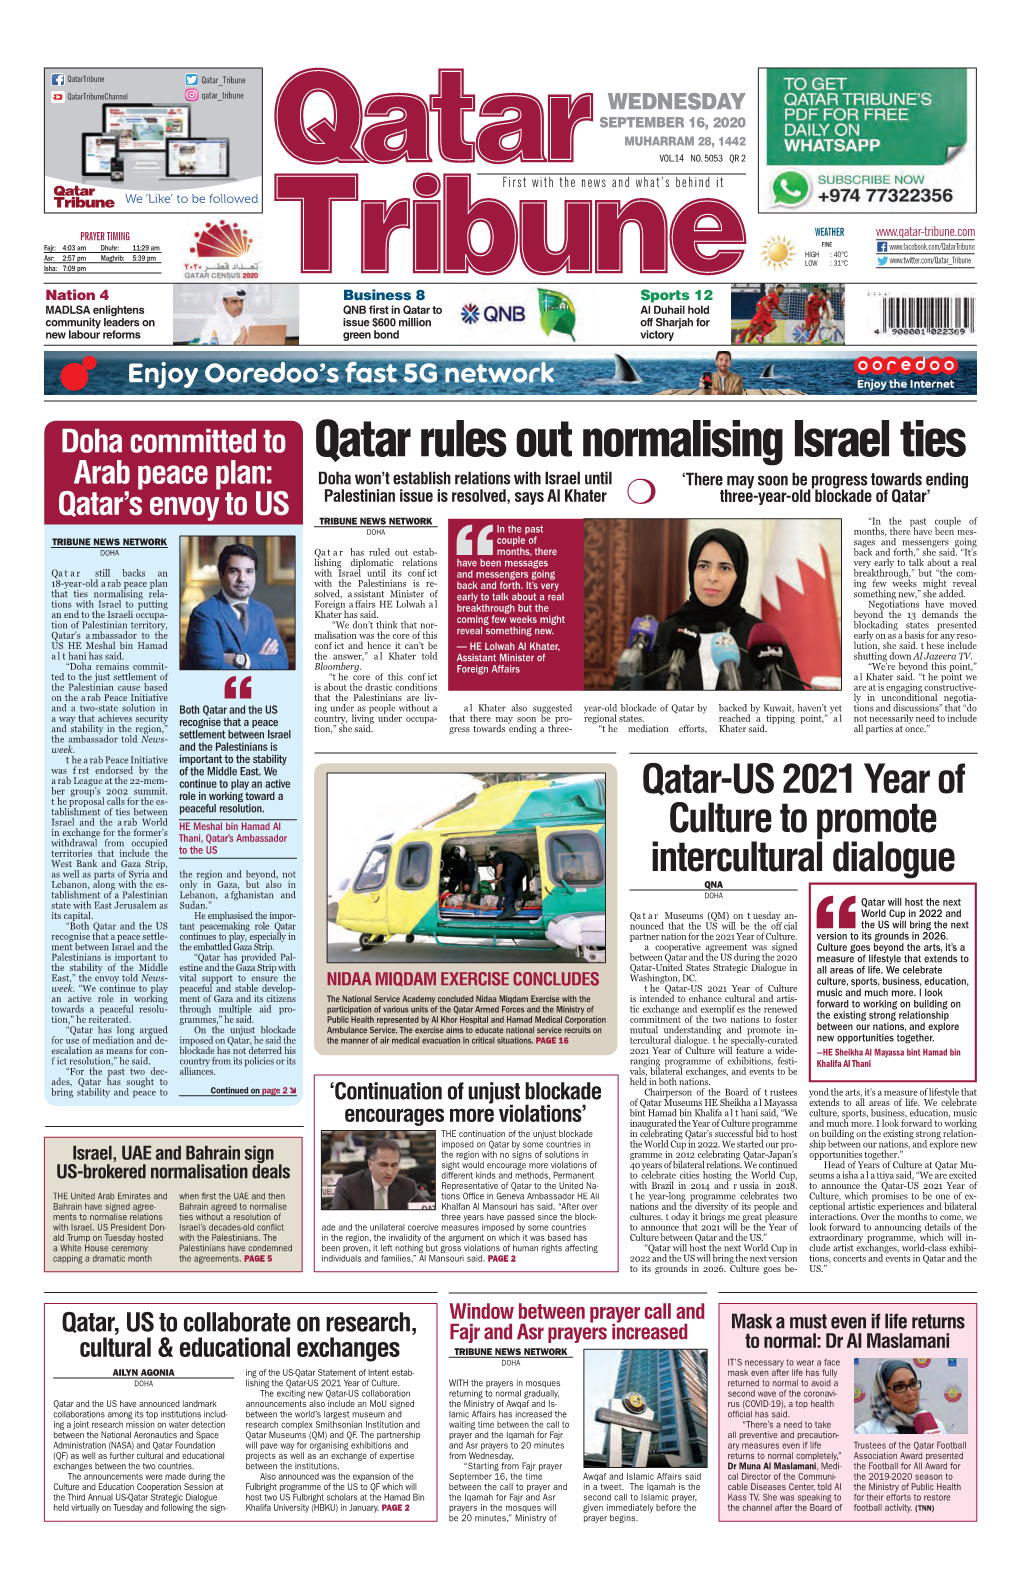 Qatar Rules out Normalising Israel Ties